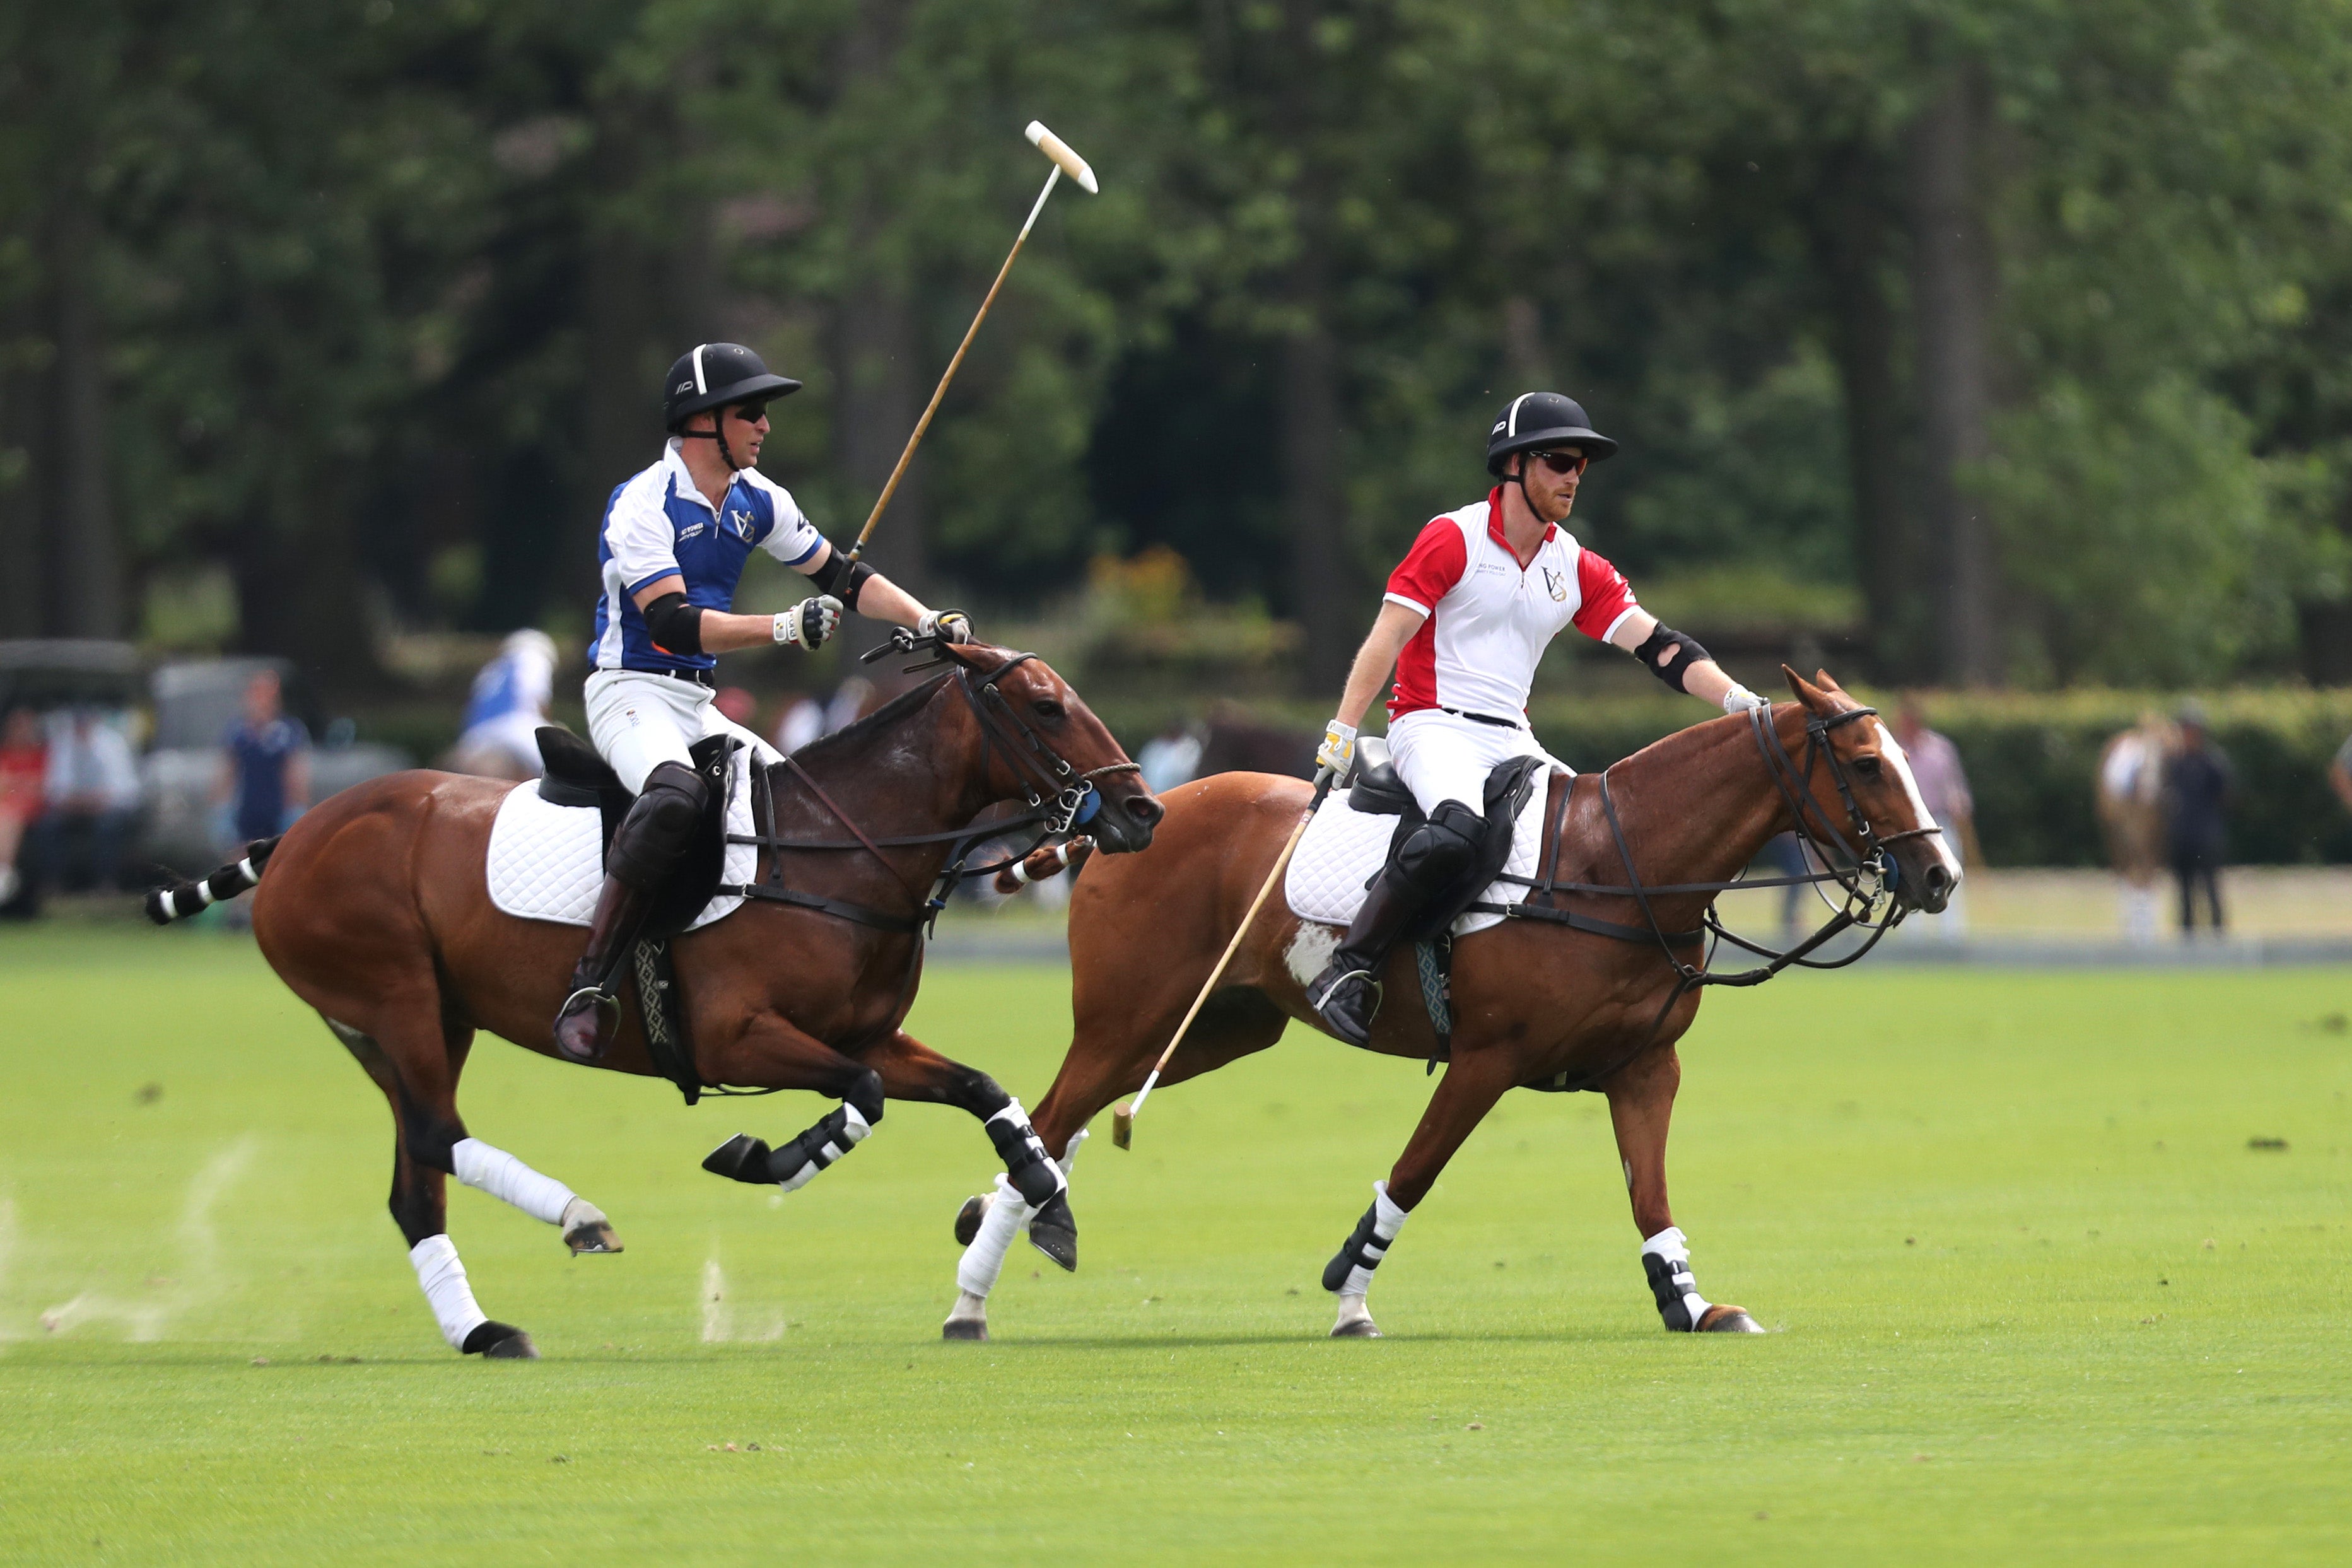 Prince William and Prince Harry compete during the King Power Royal Charity Polo Day for the Vichai Srivaddhanaprabha Memorial Trophy in 2019